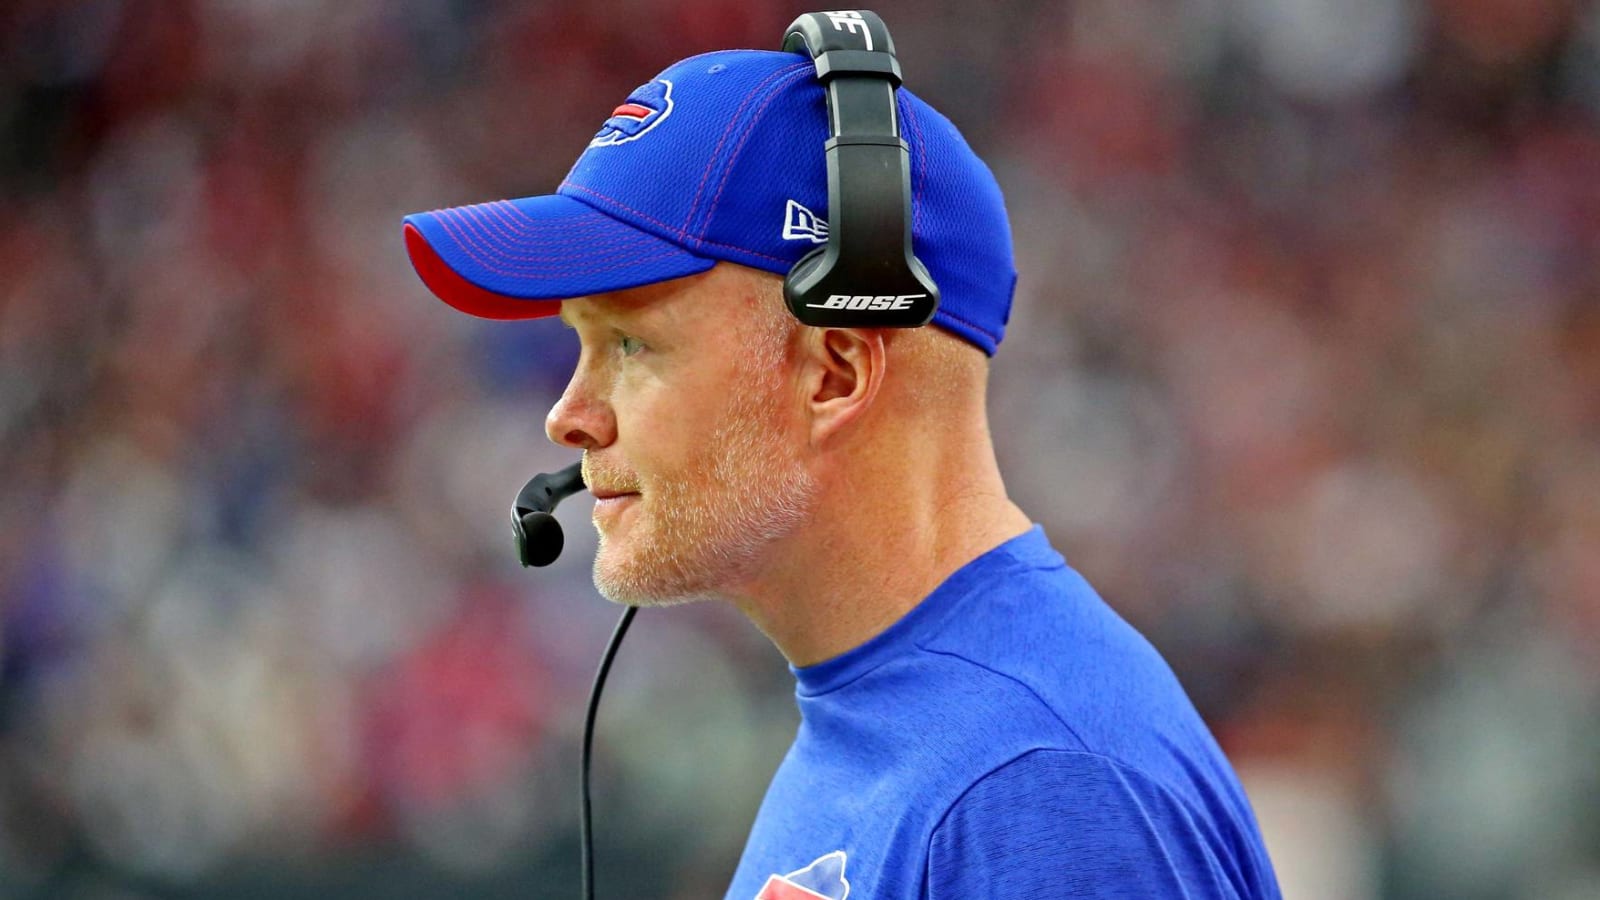 Bills coach: 'Ridiculous' some teams will have fans attend games